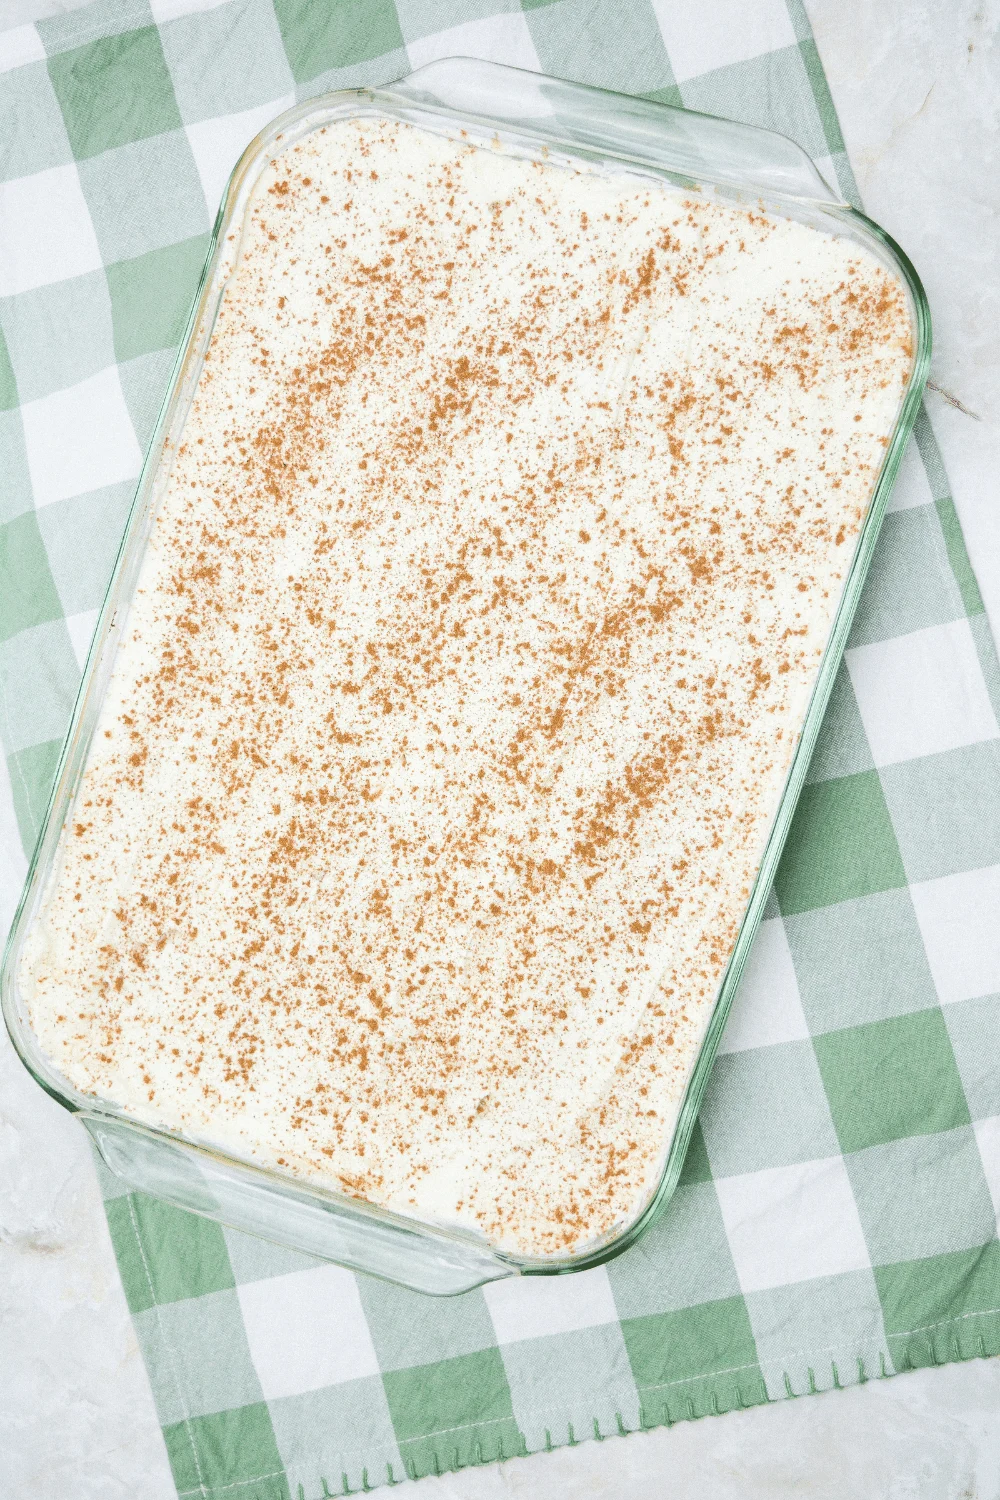 cinnamon sprinkled on top of whipped cream and pumpkin layers for no bake pumpkin icebox cake recipe